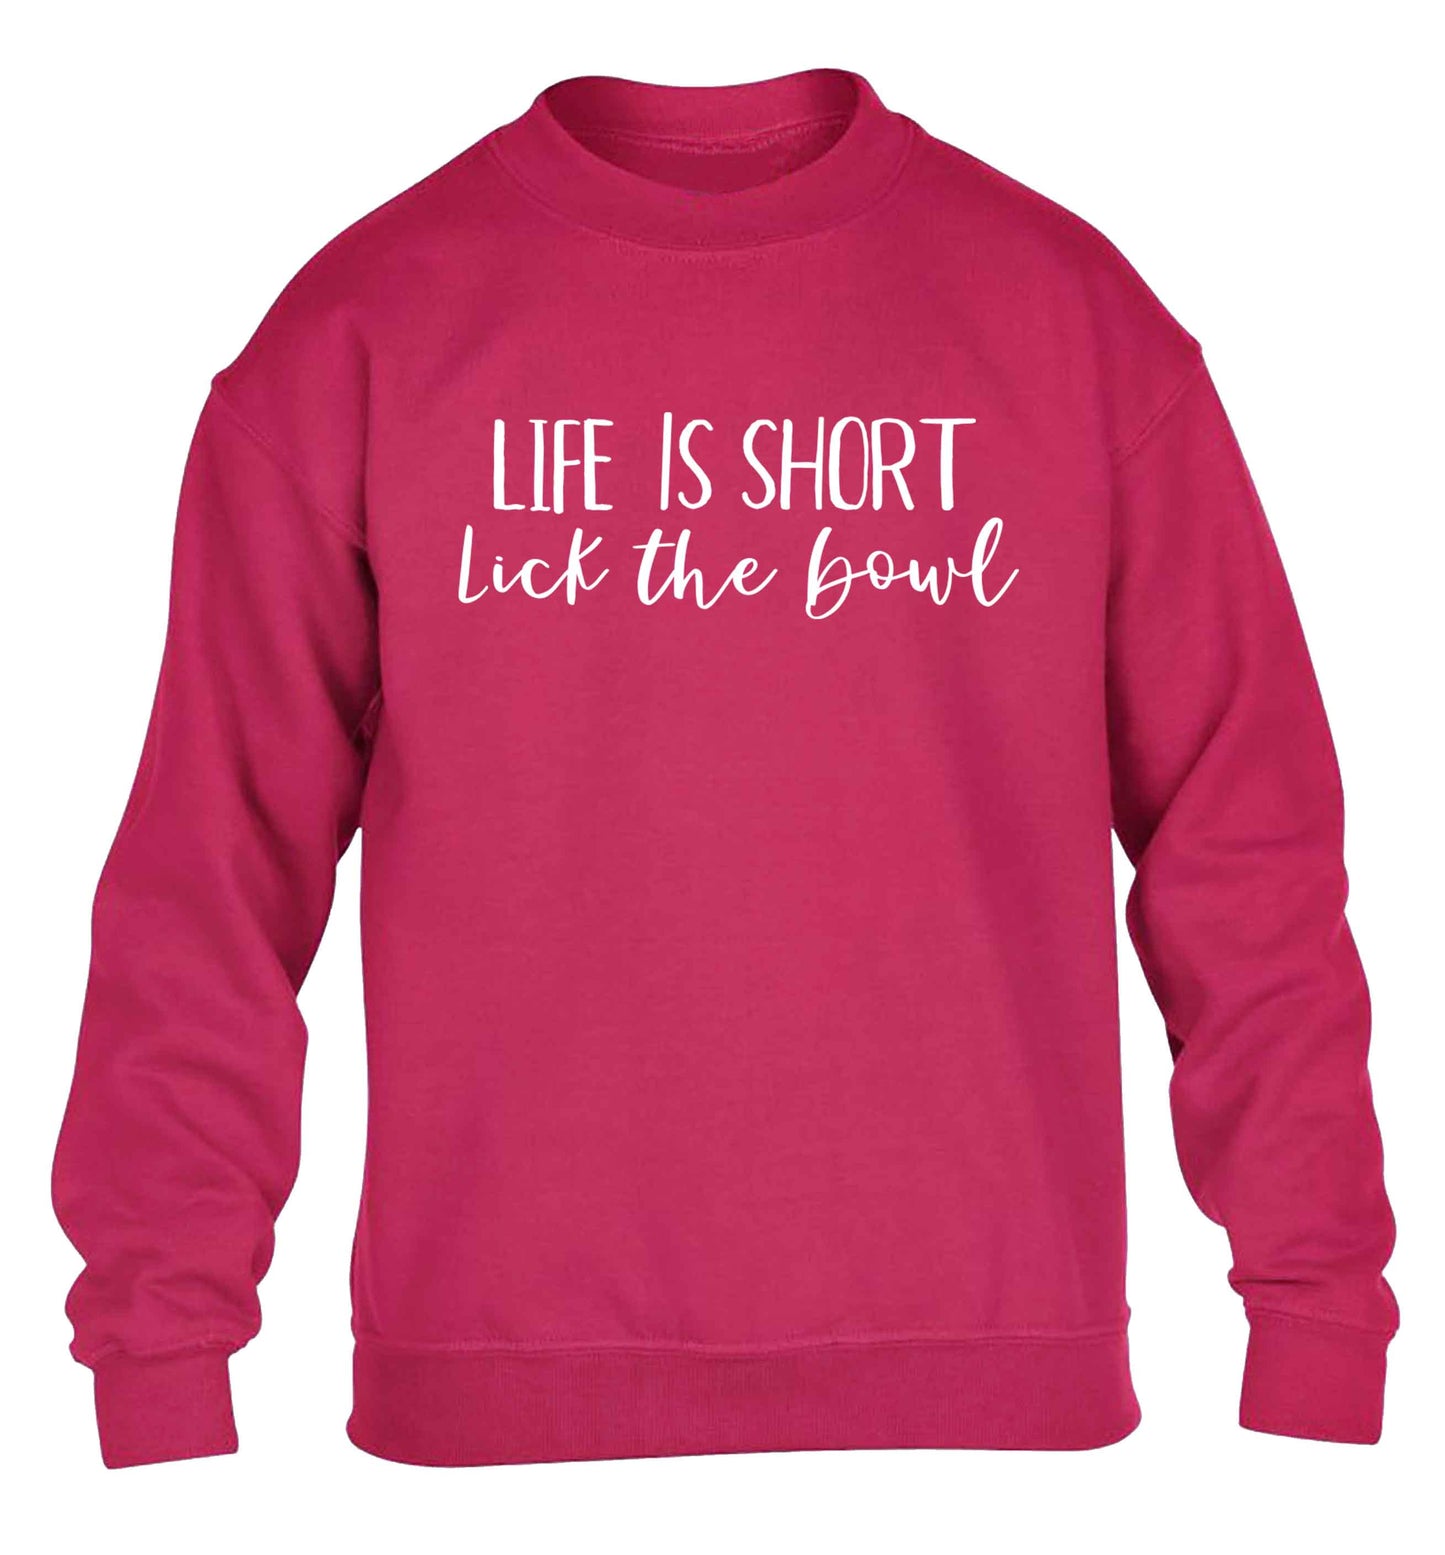 Life is short lick the bowl children's pink sweater 12-13 Years